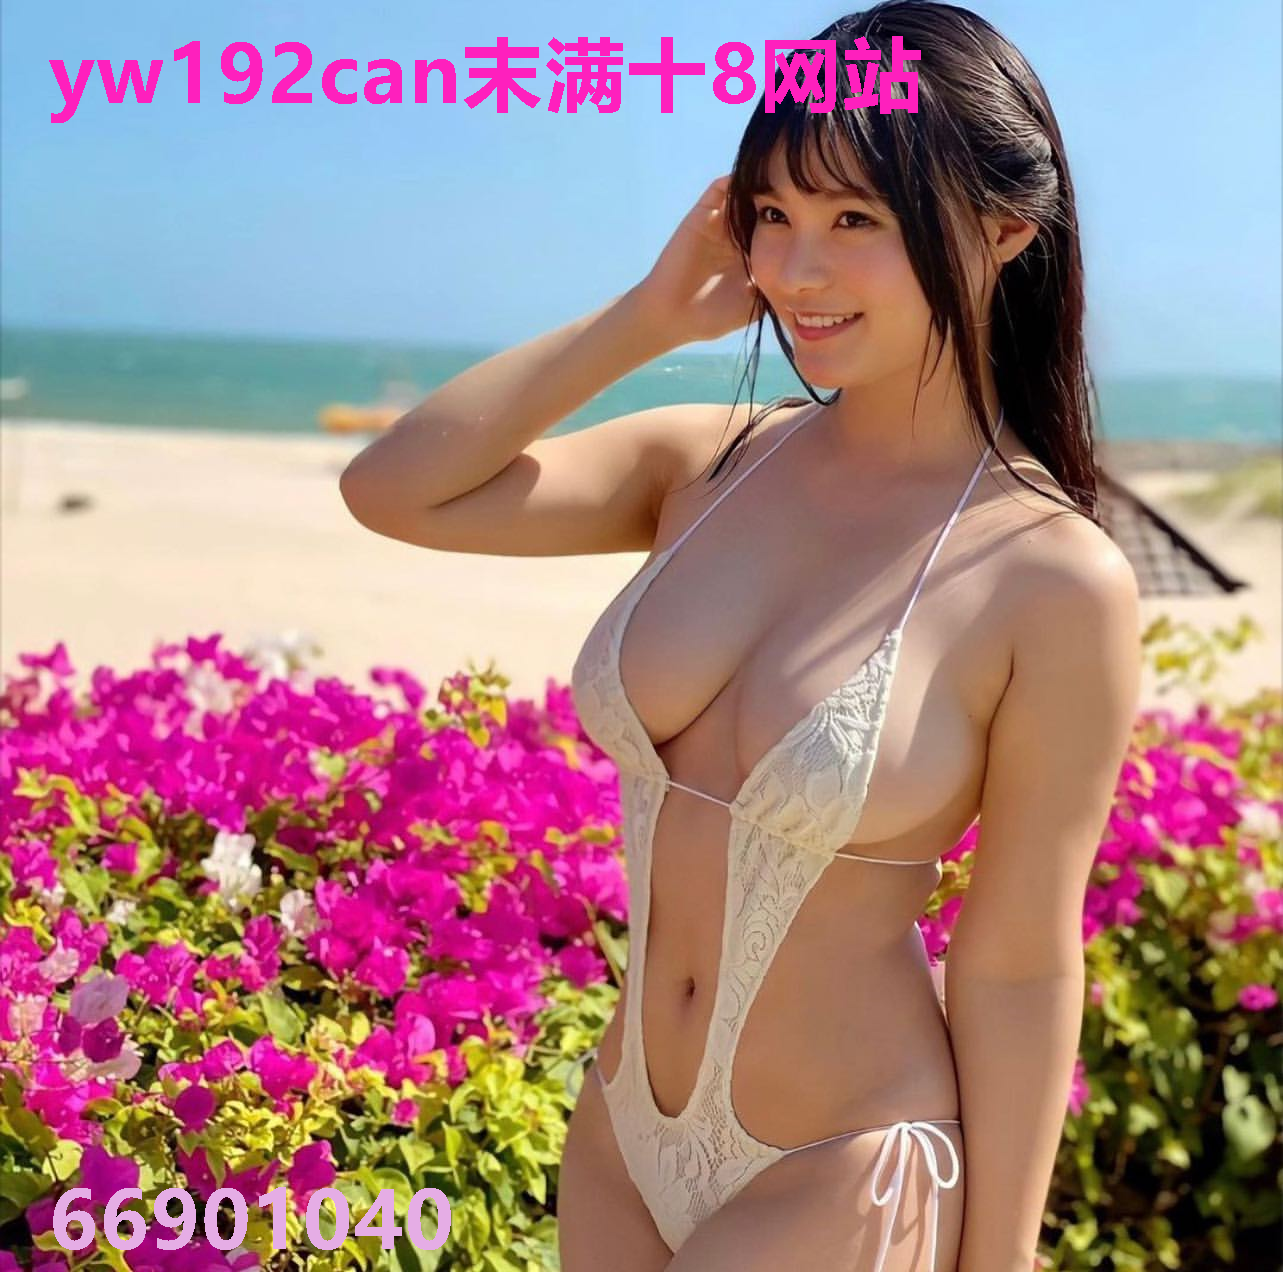 yw192can末满十8网站